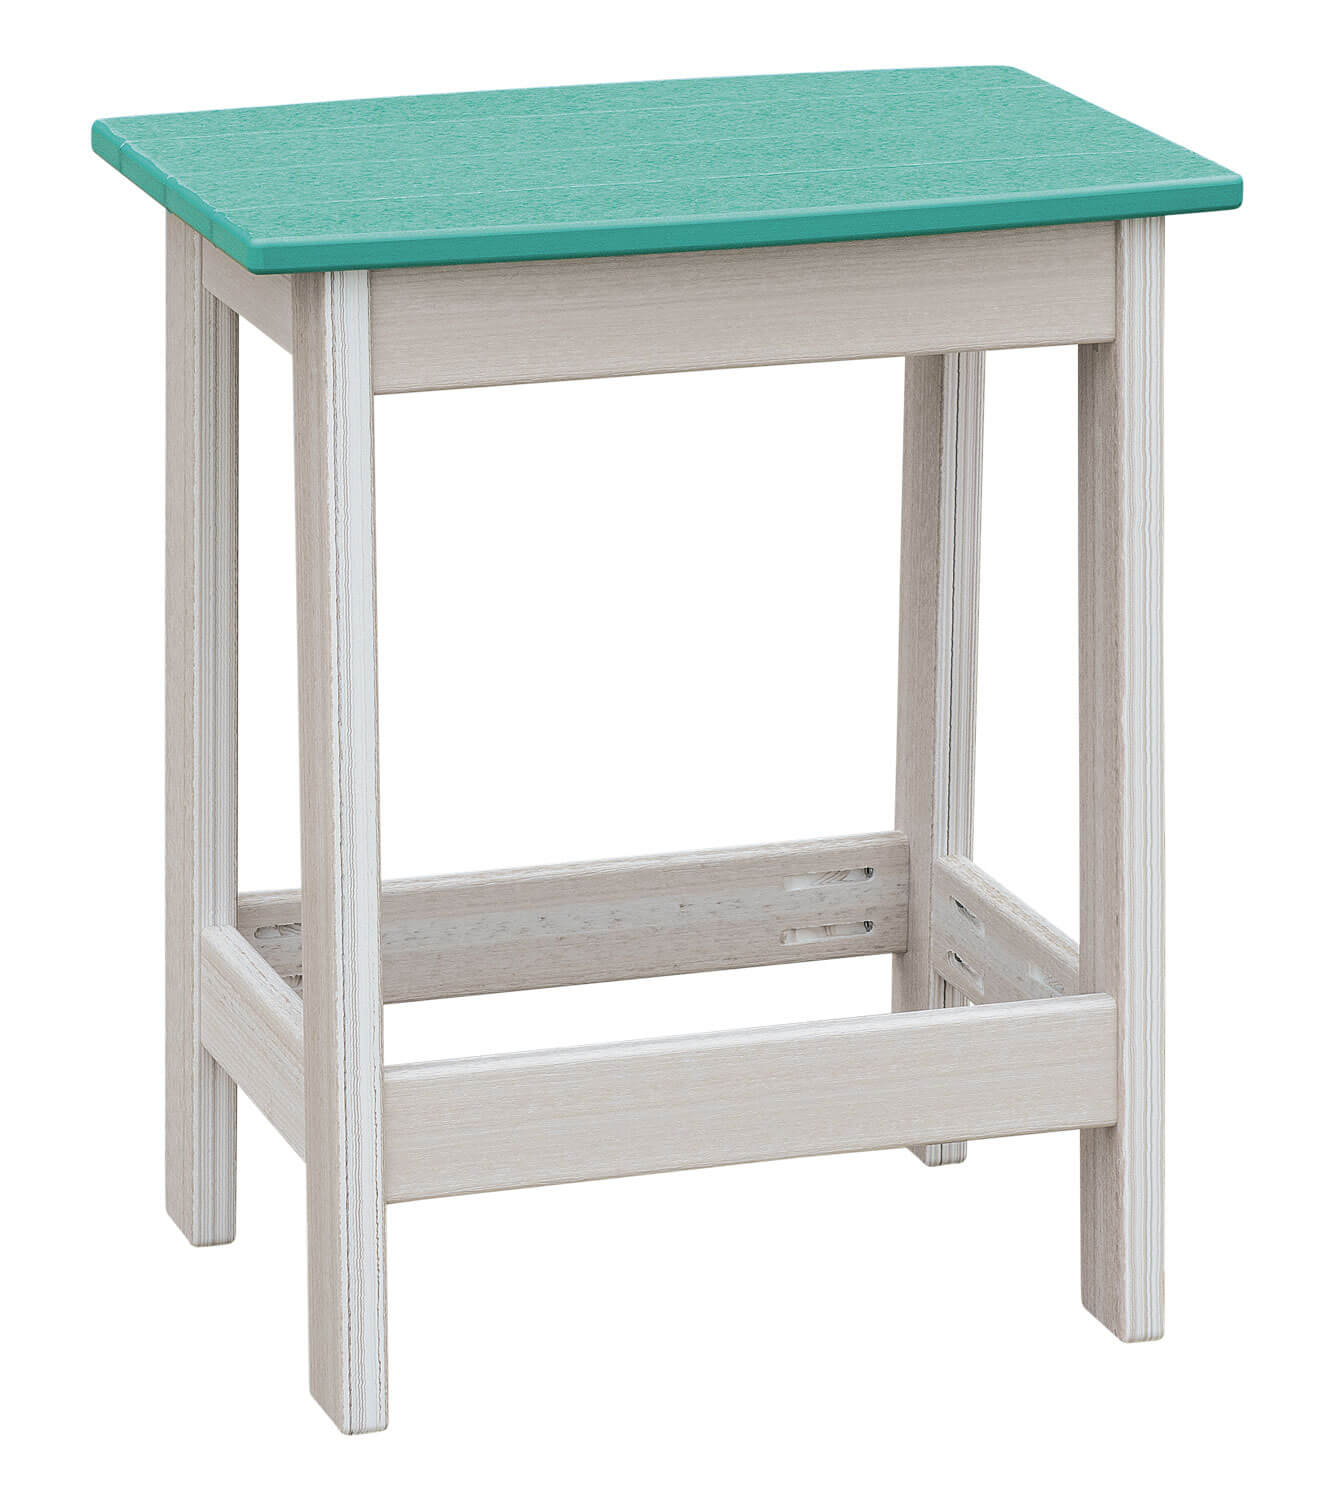 EC Woods Belmar Outdoor Poly Counter Height Barstool Shown in Aruba Blue and Seashell